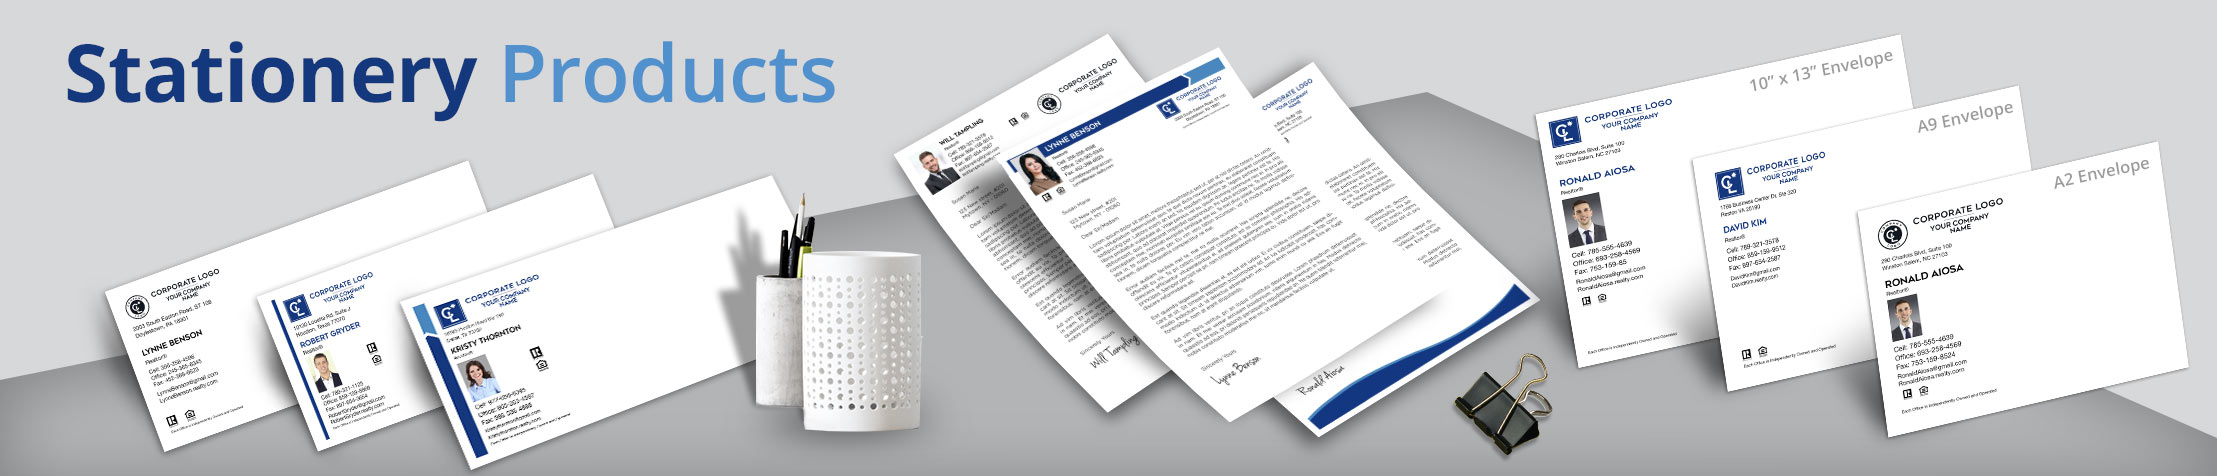 Coldwell Banker Real Estate Stationery Products - Custom Letterhead & Envelopes Stationery Products for Realtors | BestPrintBuy.com